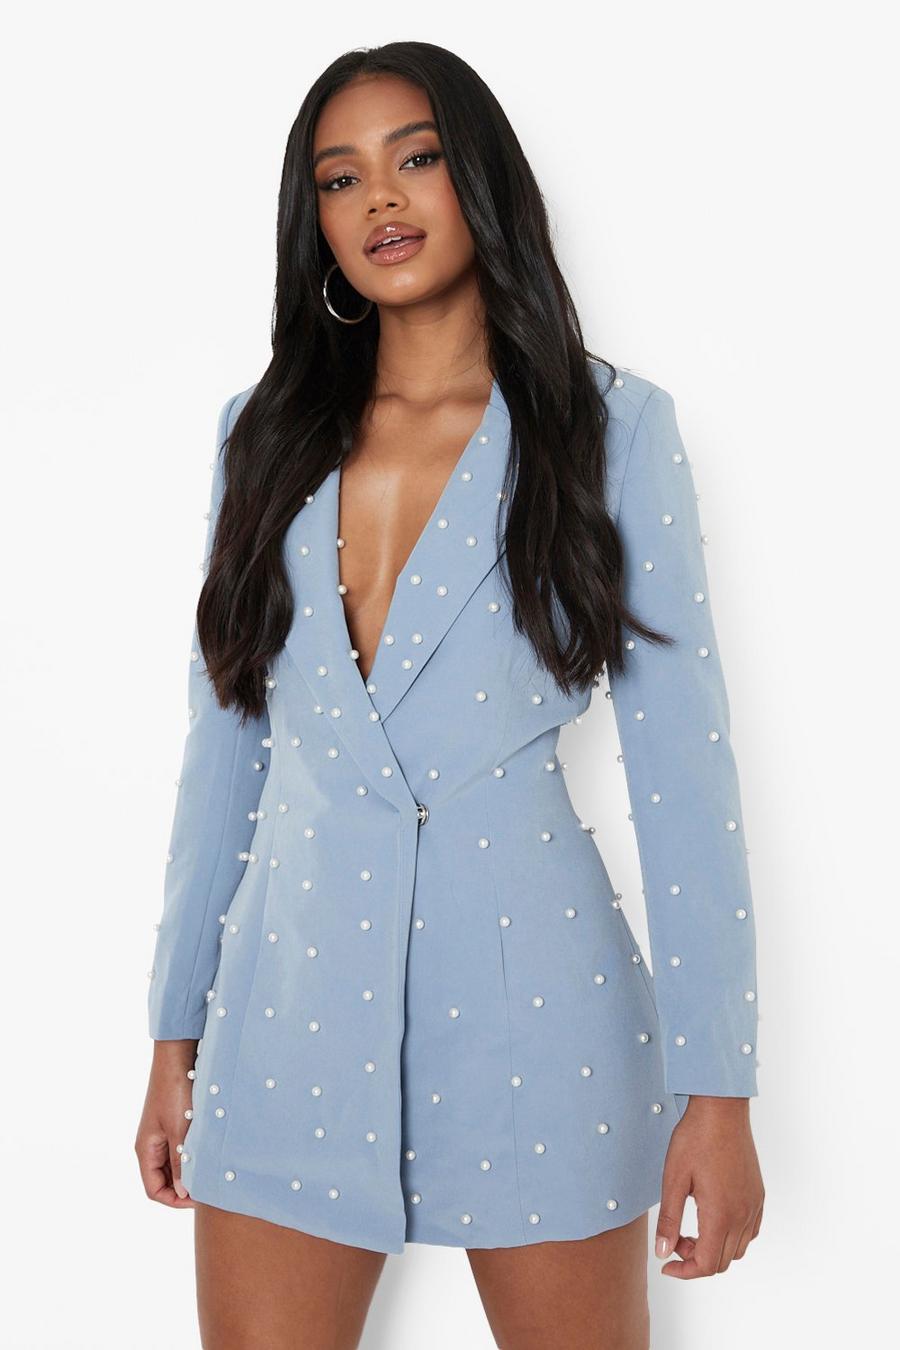 Outfits With Blue Blazers For Women